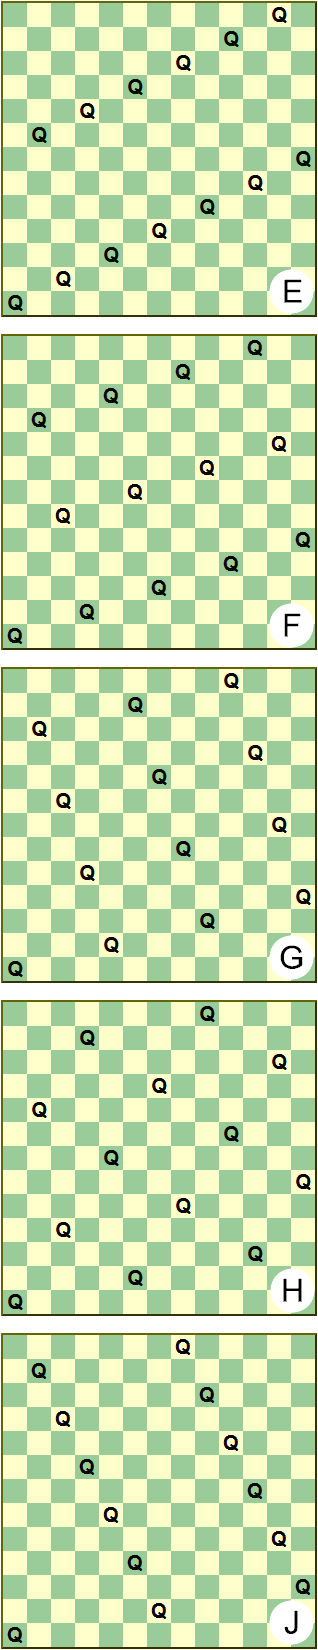 Five 13x13 chessboard diagrams illustrating the five different gradients of diagonal lines of Queens found amongst the 2D boards within the 3D cube solutions